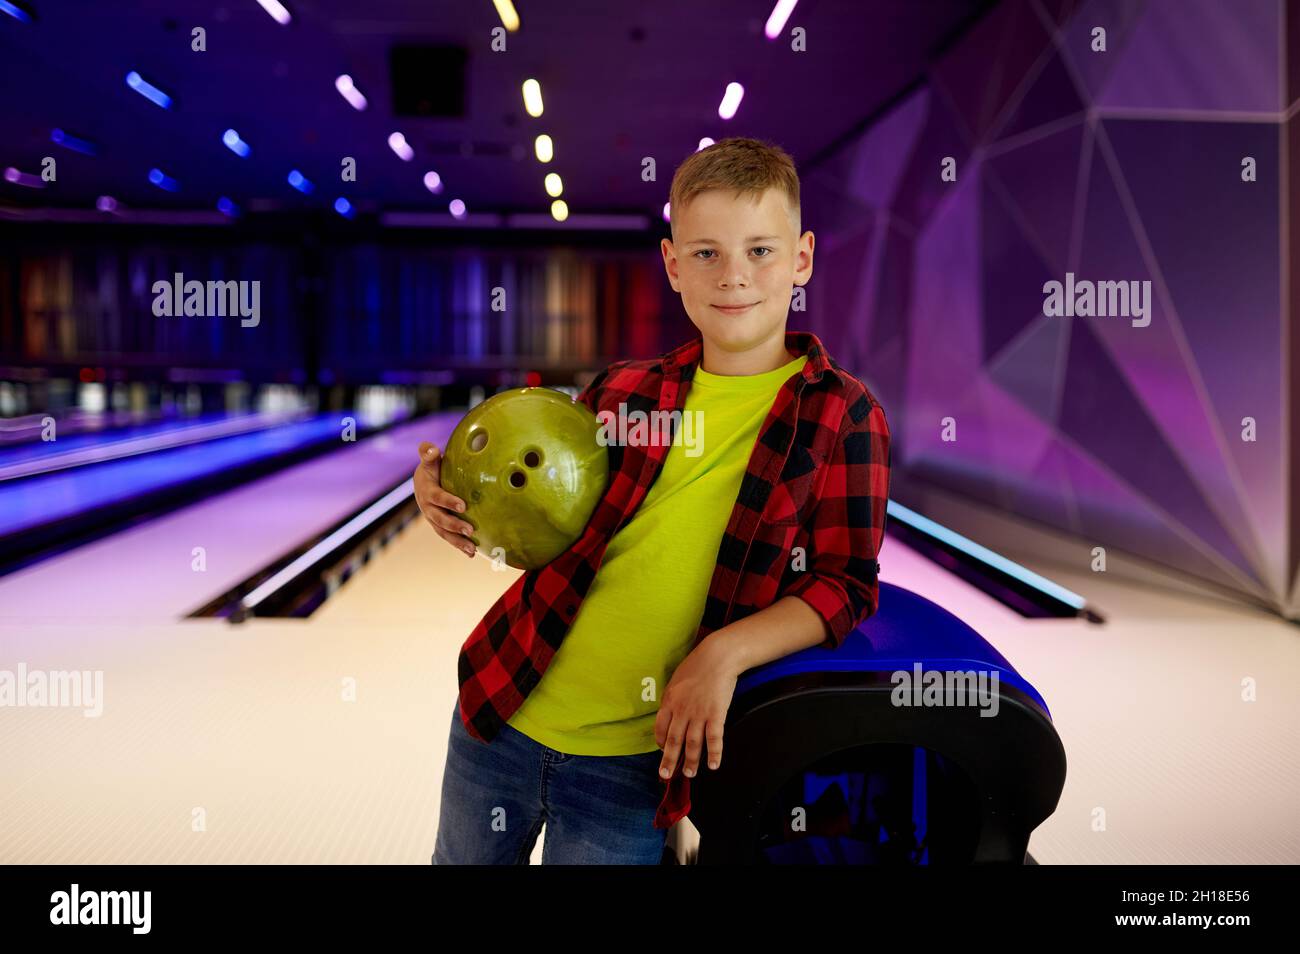 Boy with ball poses at the lane in bowling alley Stock Photo